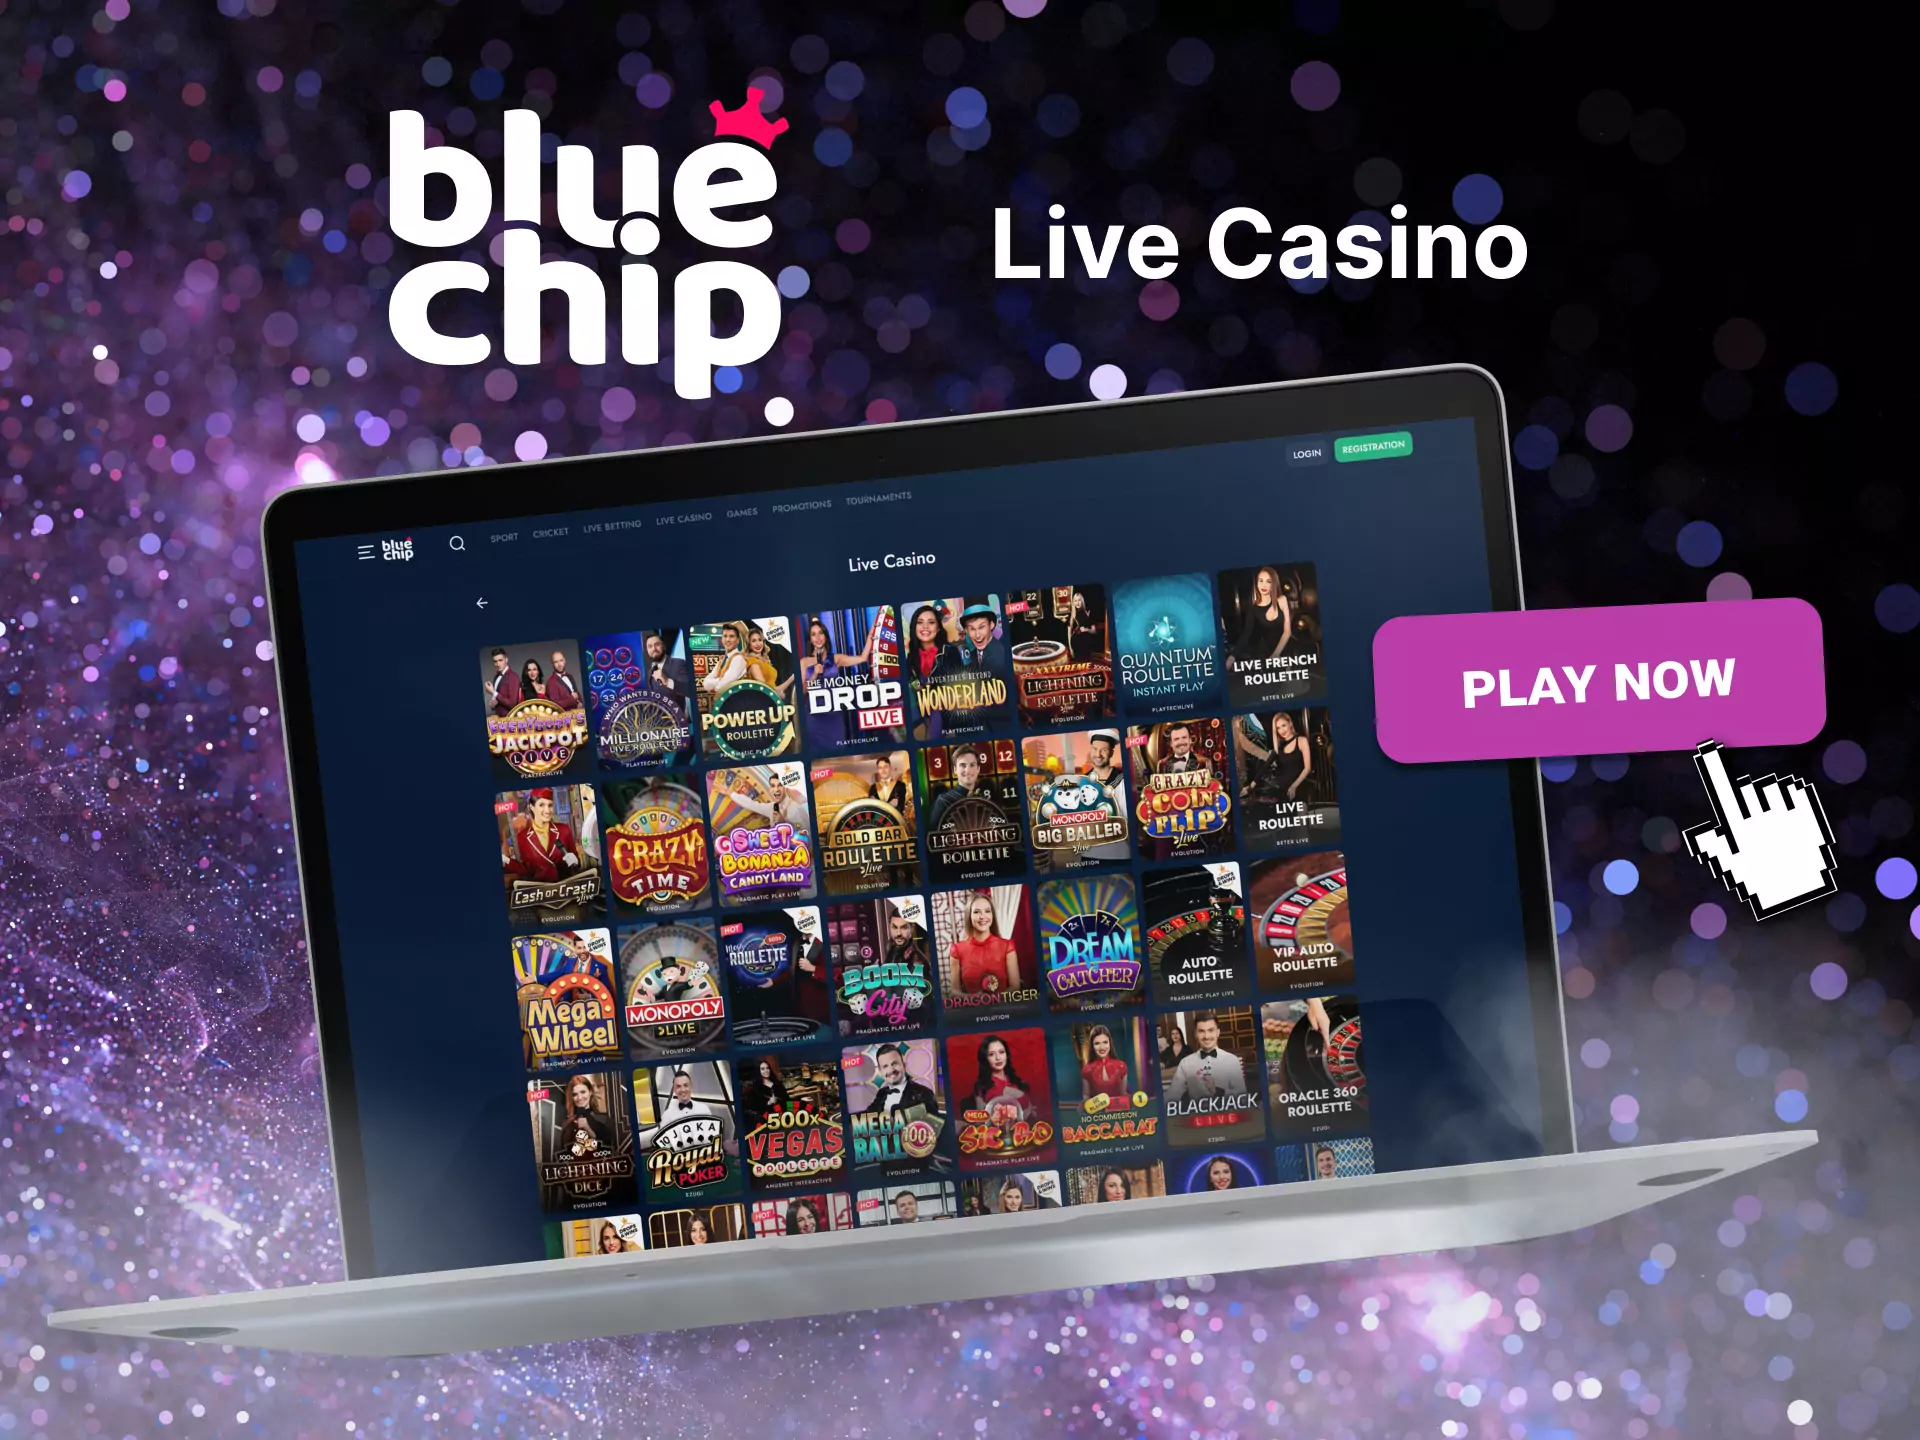 Place bets and win at Bluechip live casino.